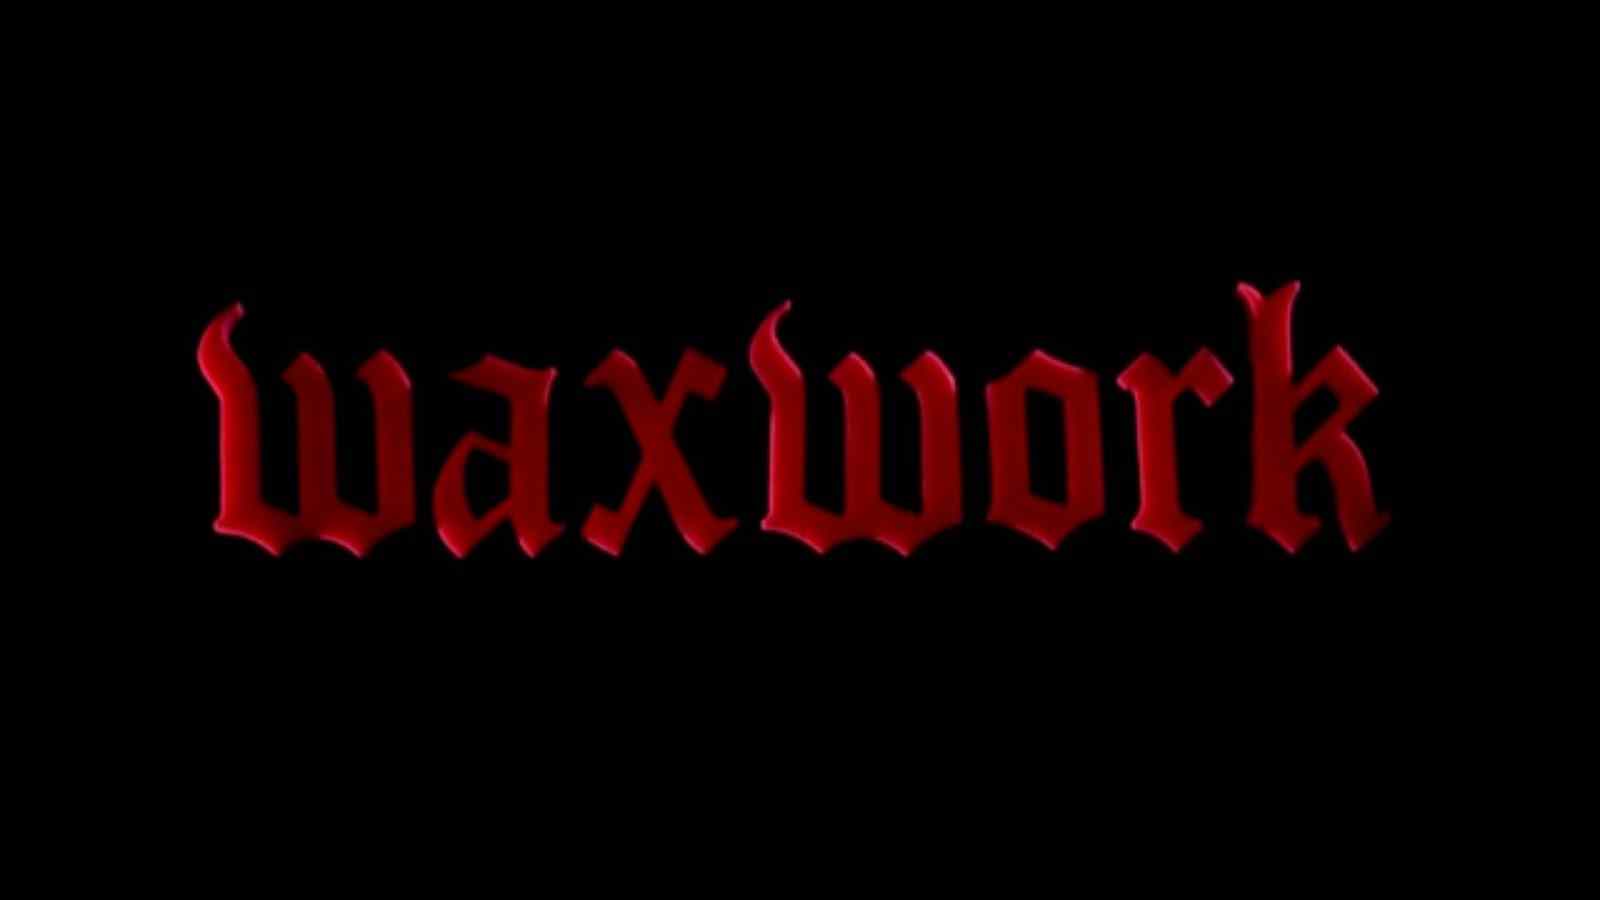 The title screen sequence in Waxwork